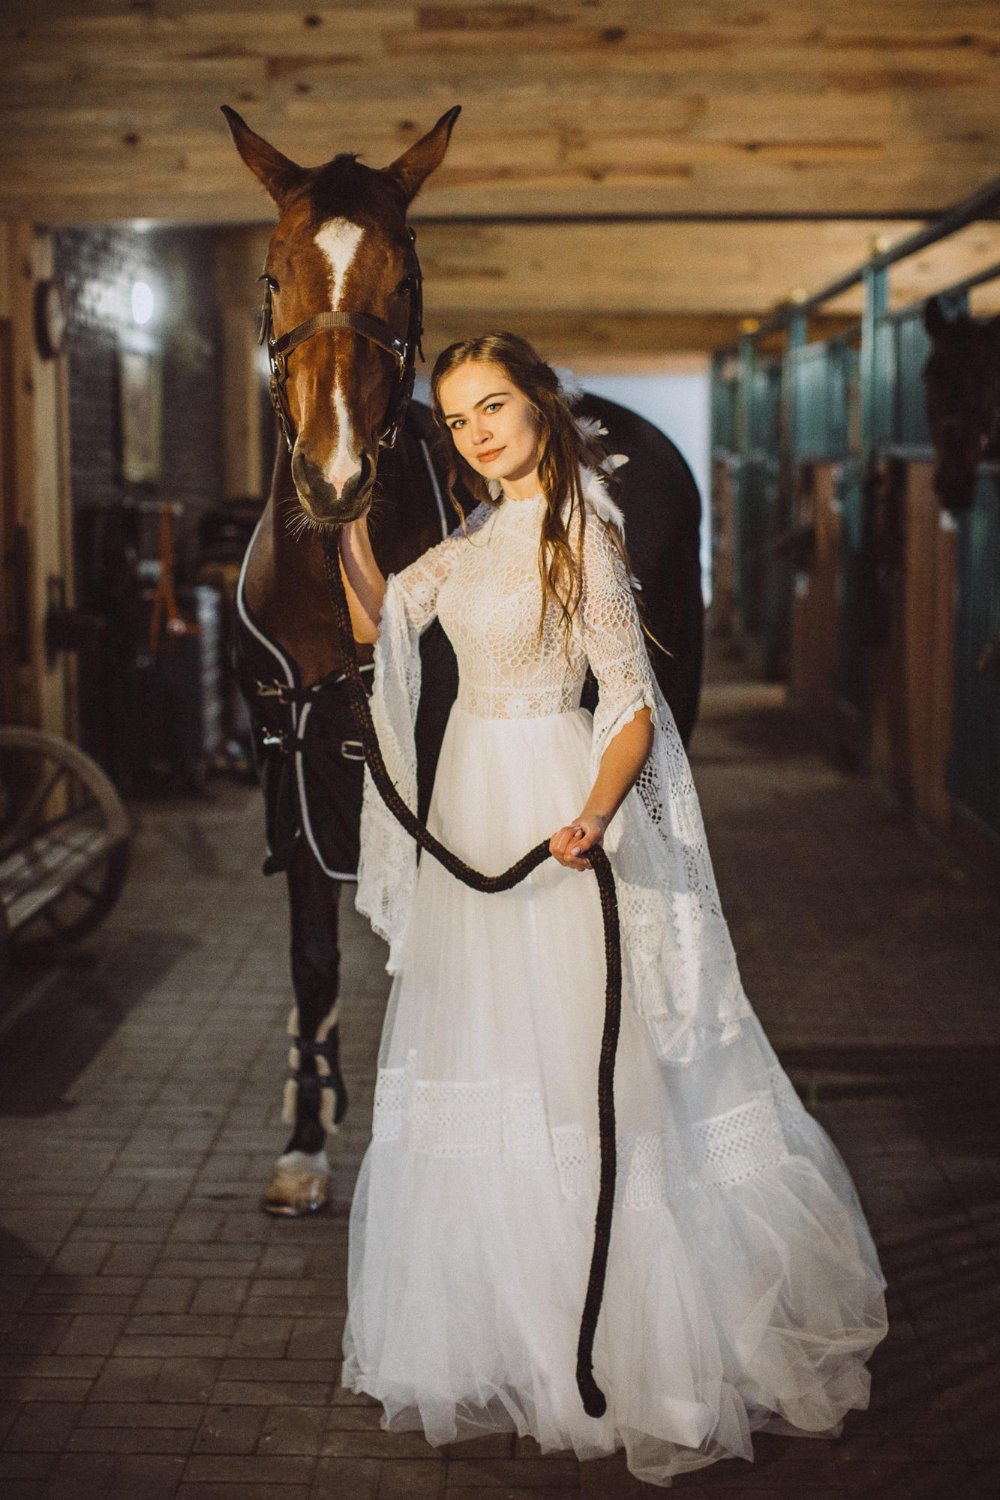 boho bride poses with a horse in a stable